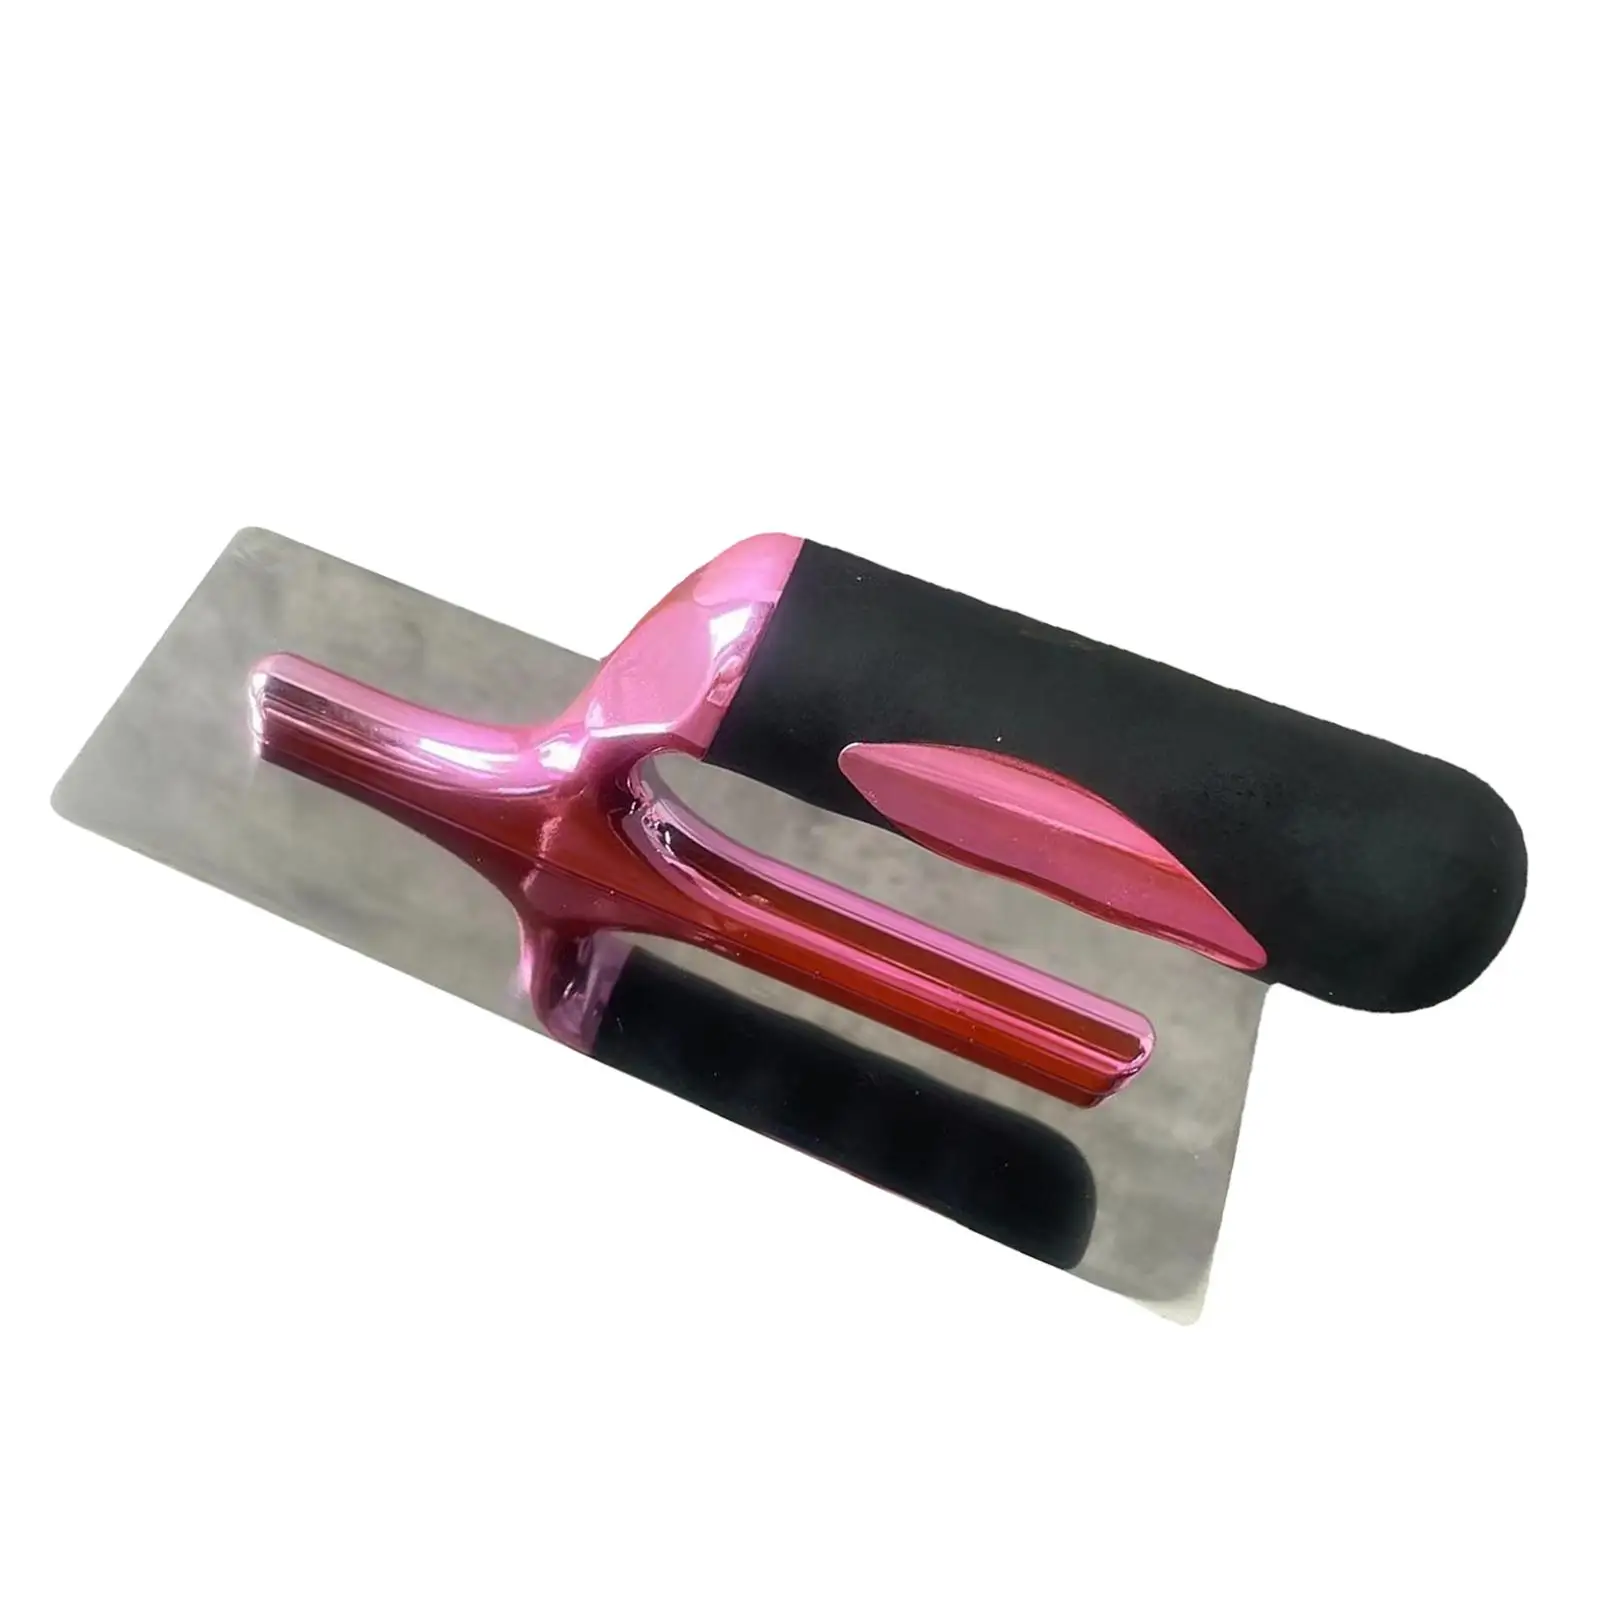 Plaster Finishing Trowel Multipurpose Paint Tools Paint Scraper Drywall Plastering Trowel for Cement Wall Decoration Concrete